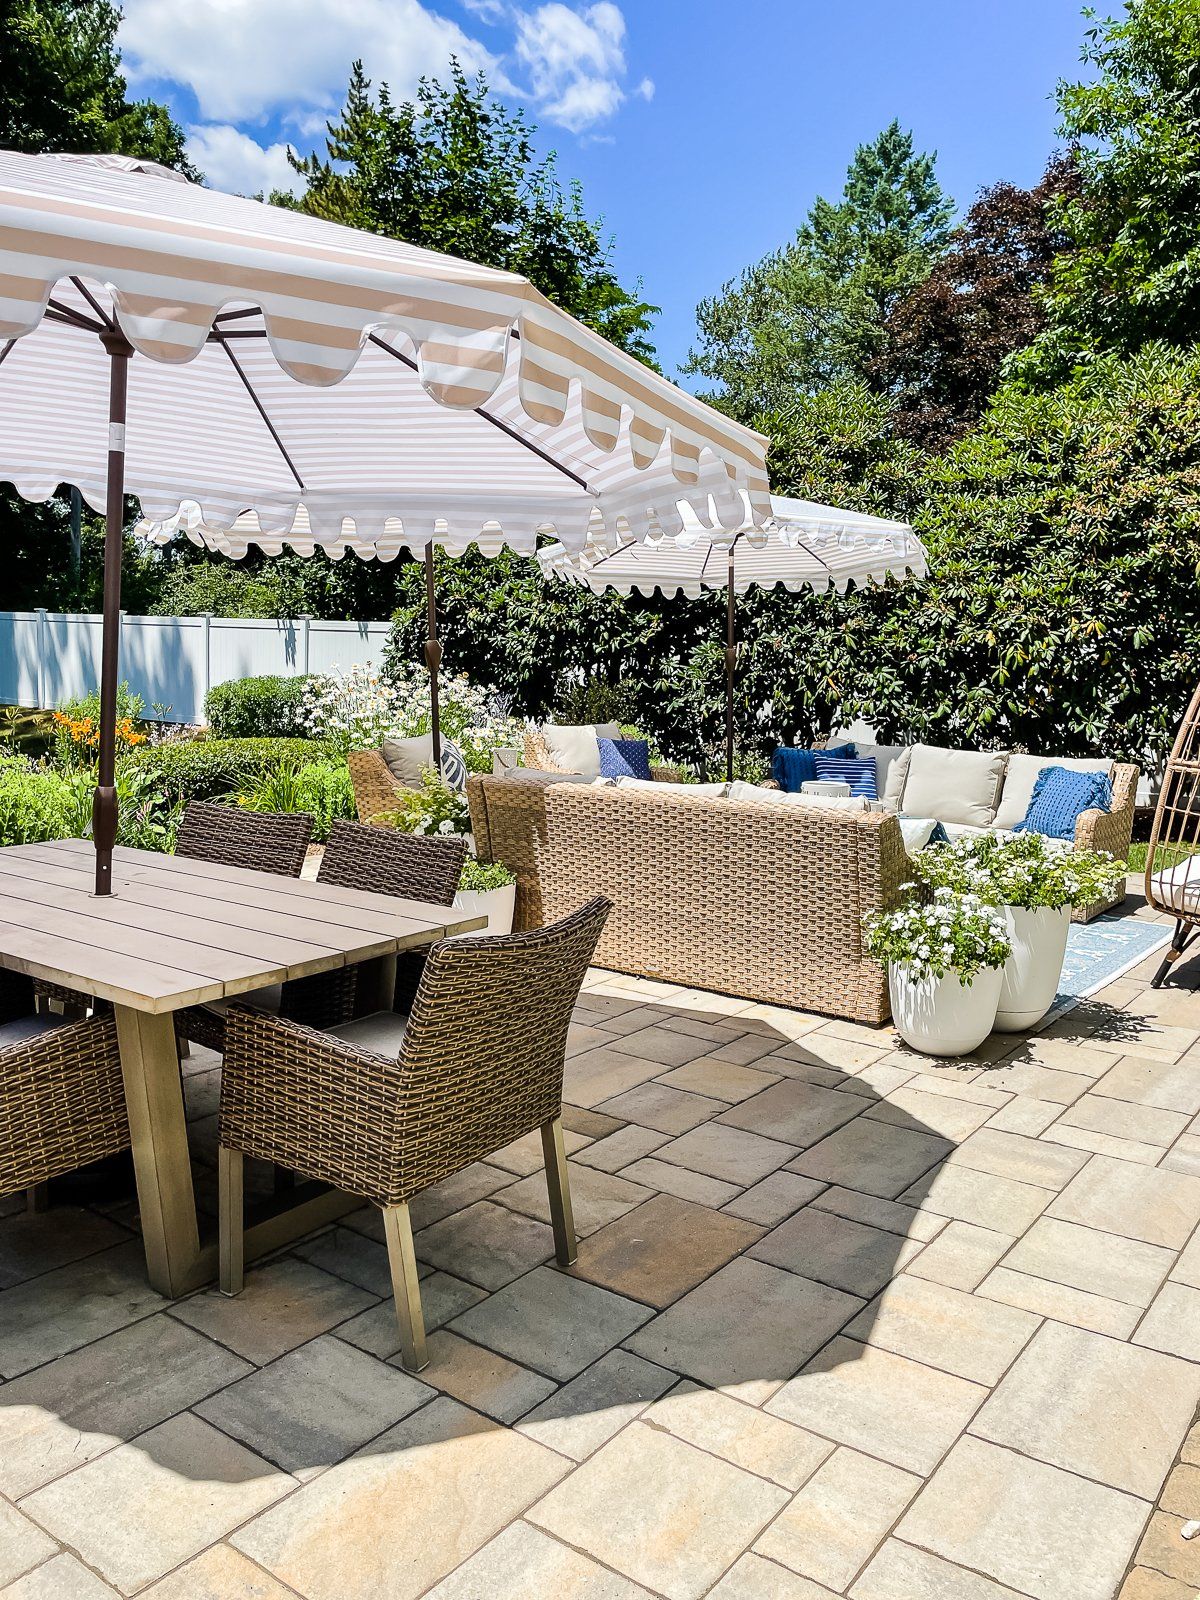 Upgrade Your Outdoor Space with a Stylish Wicker Patio Set